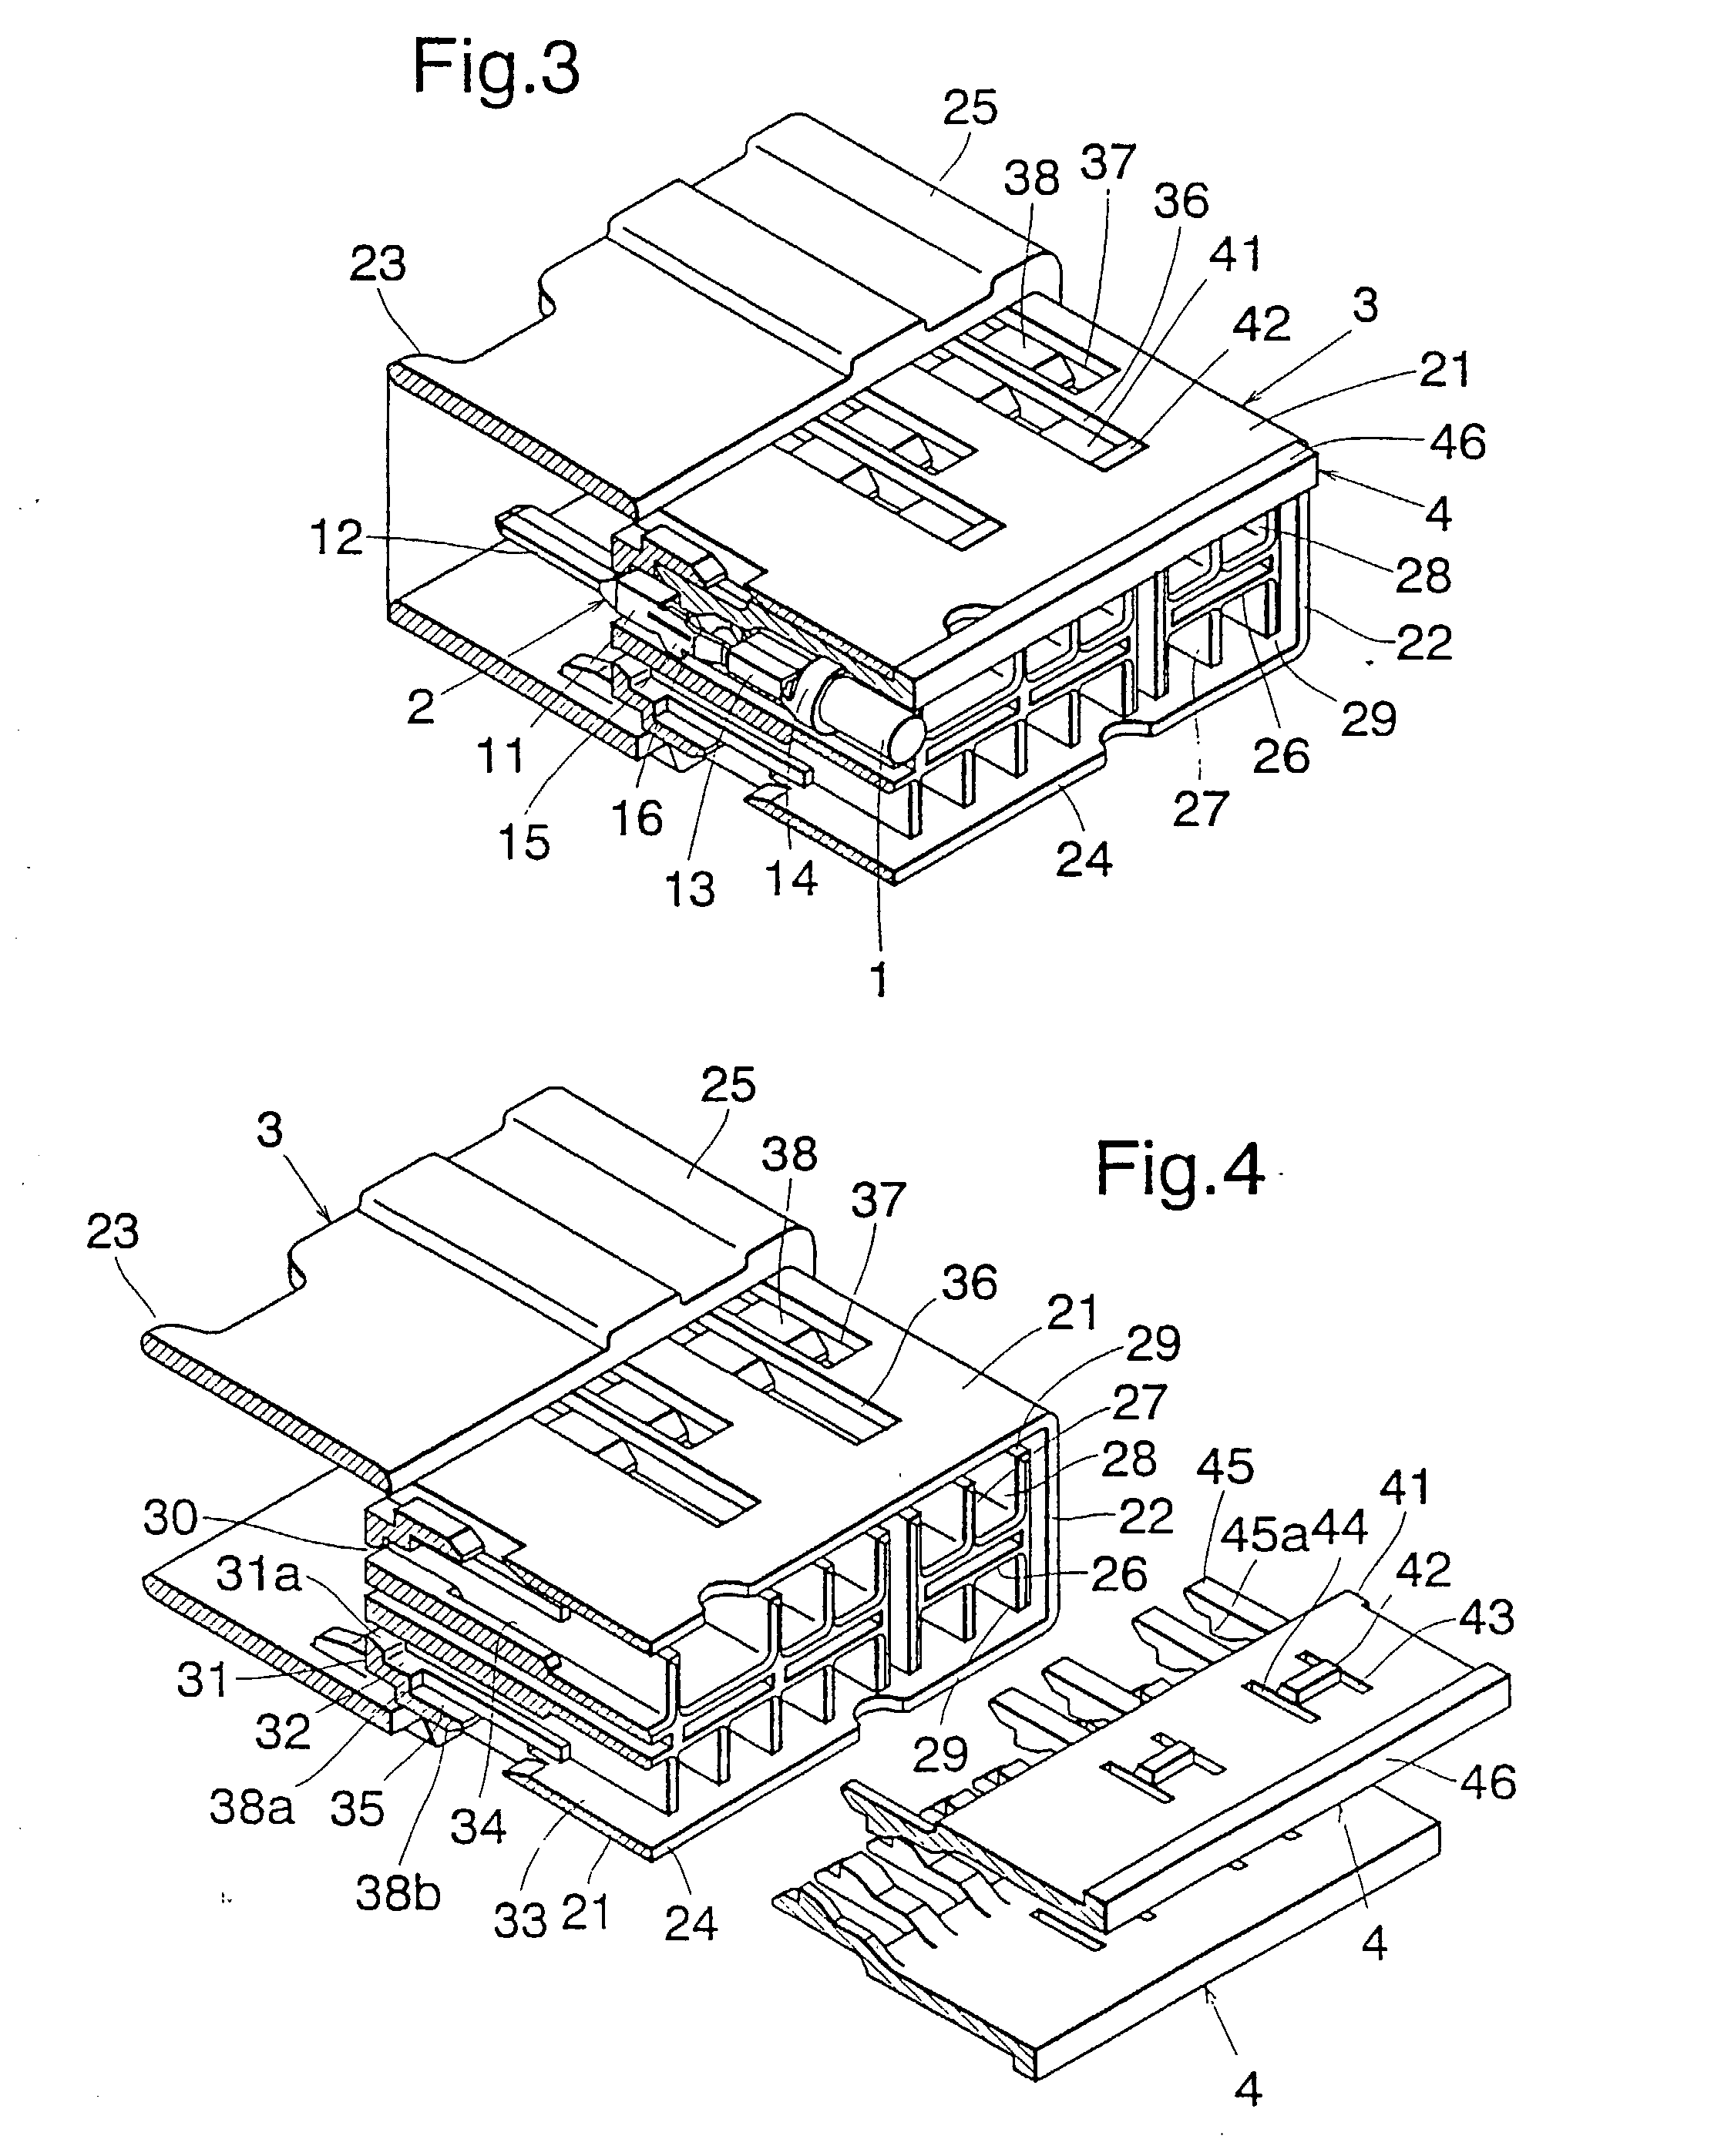 Electric connector permitting testing of electric conductivity of terminals in provisional locking position